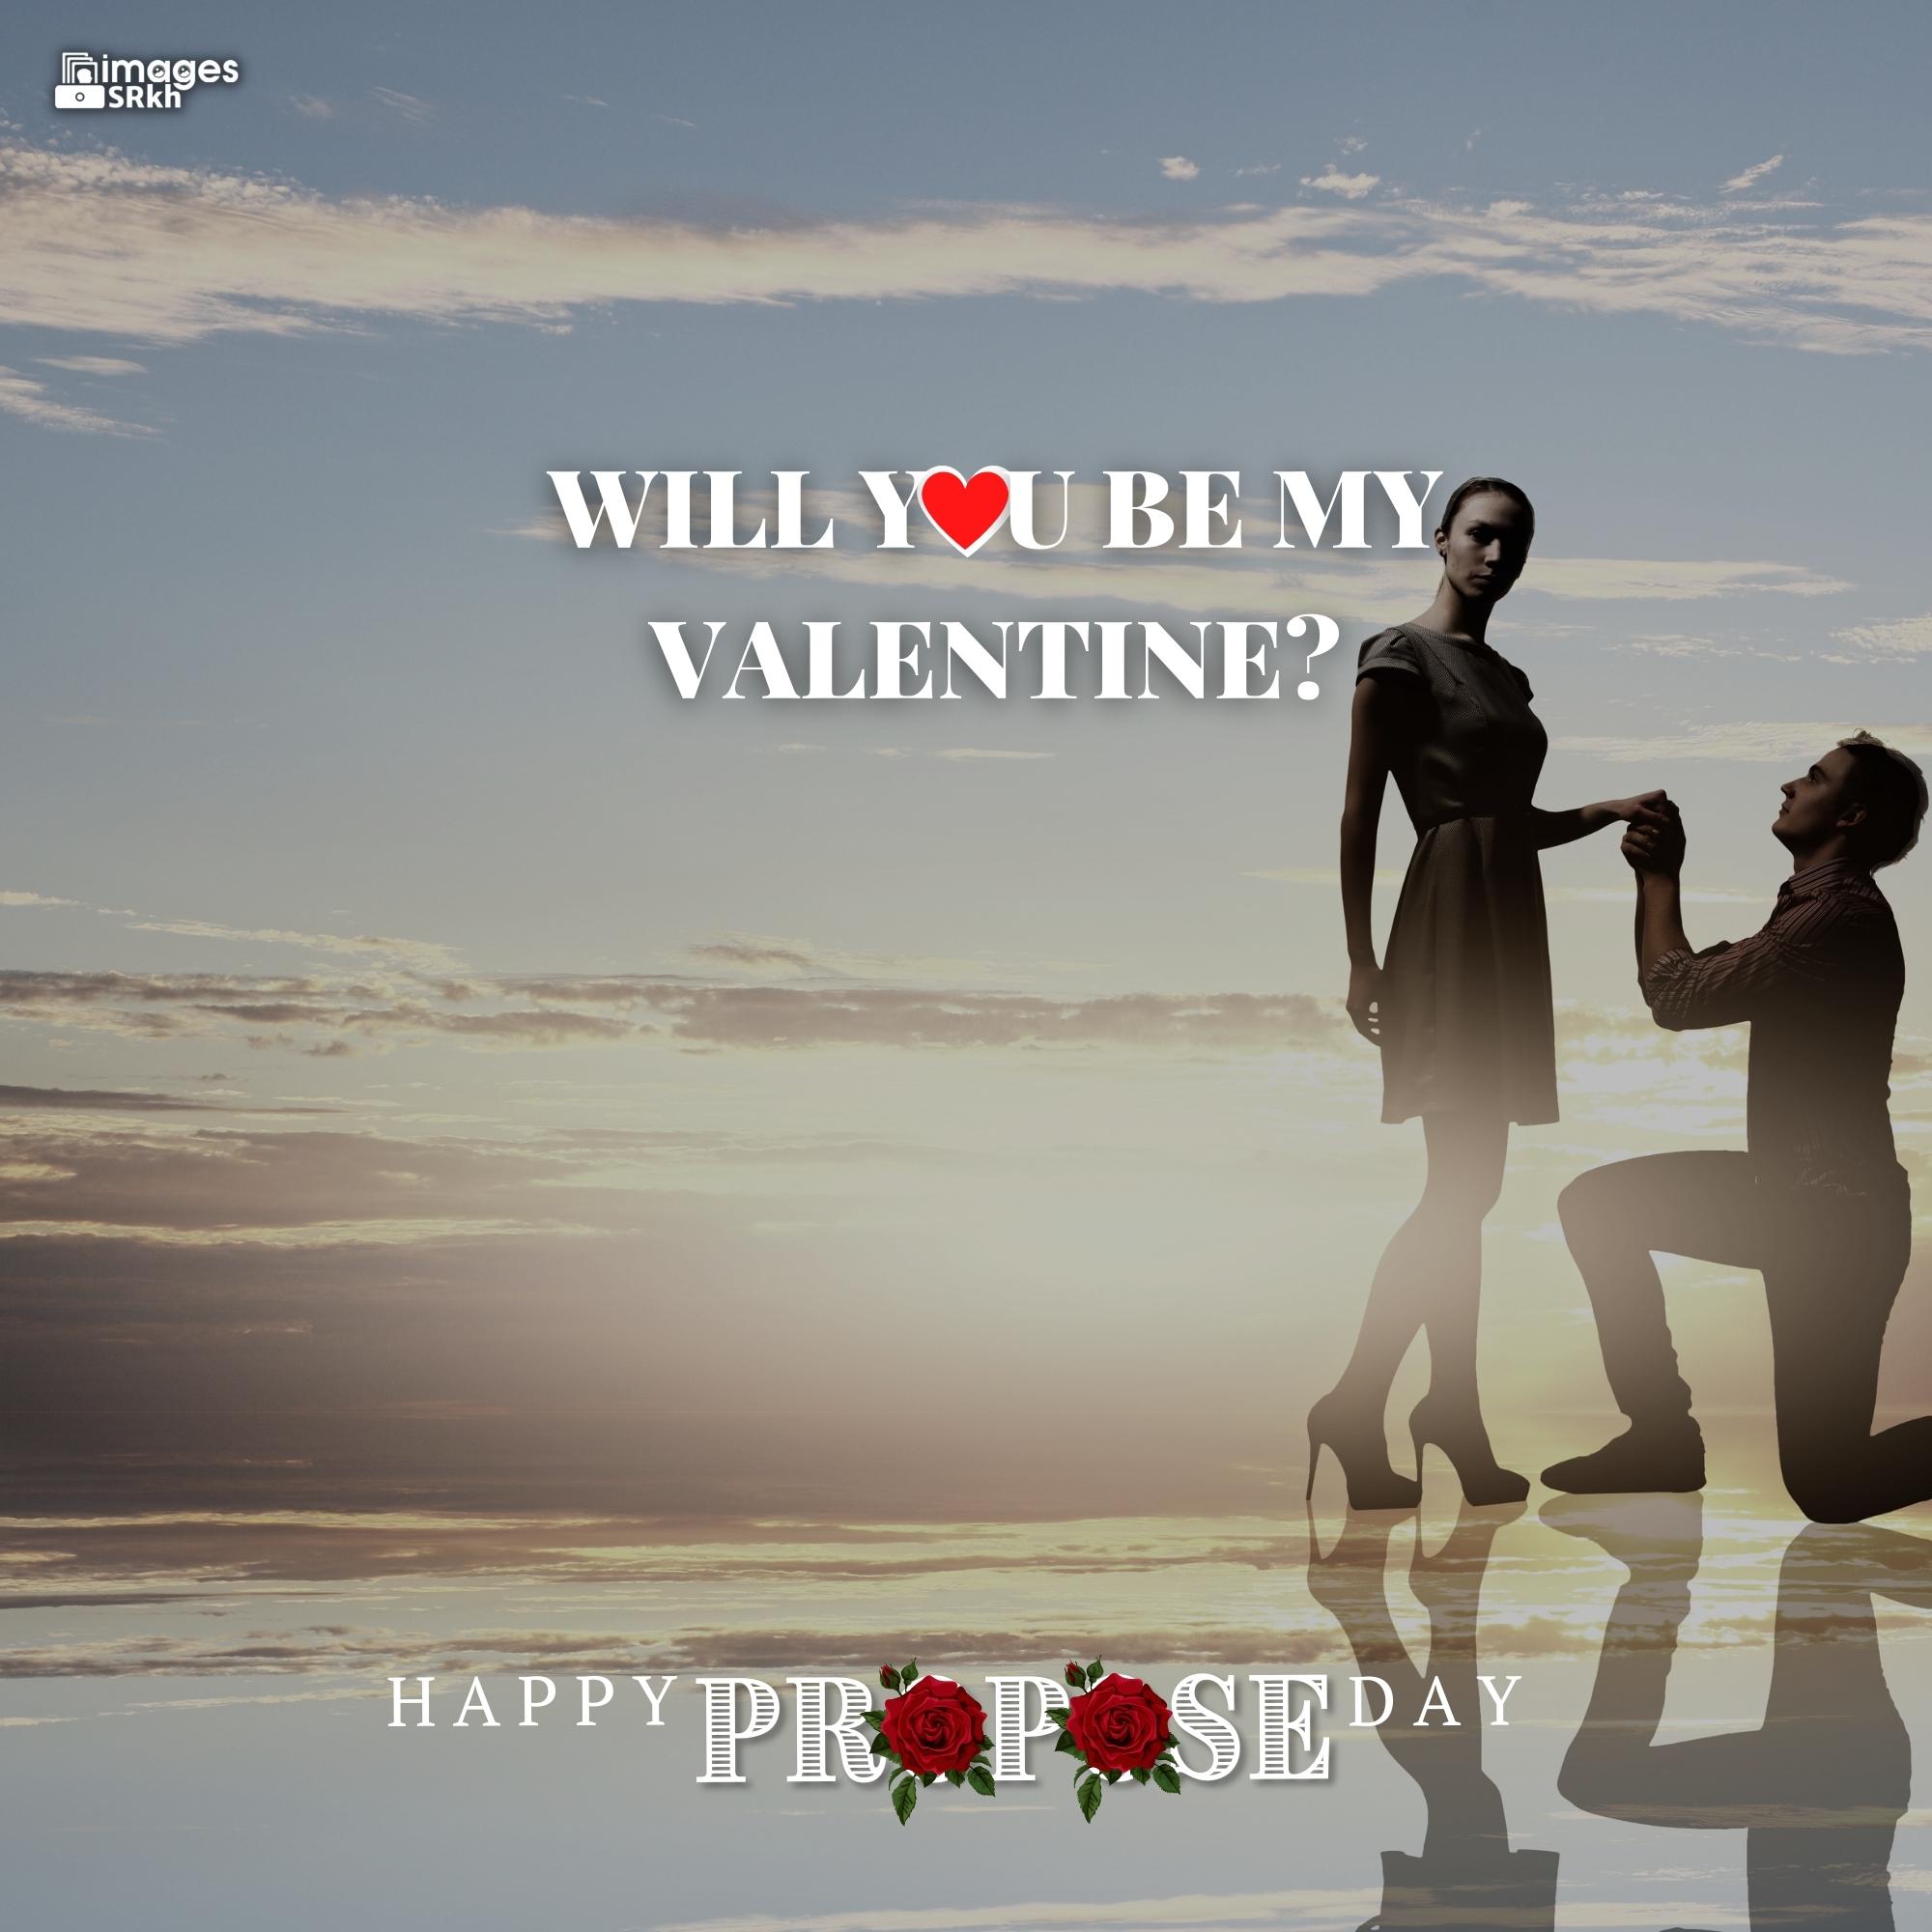 Propose Day Images | 217 | Will You Be My Valentine